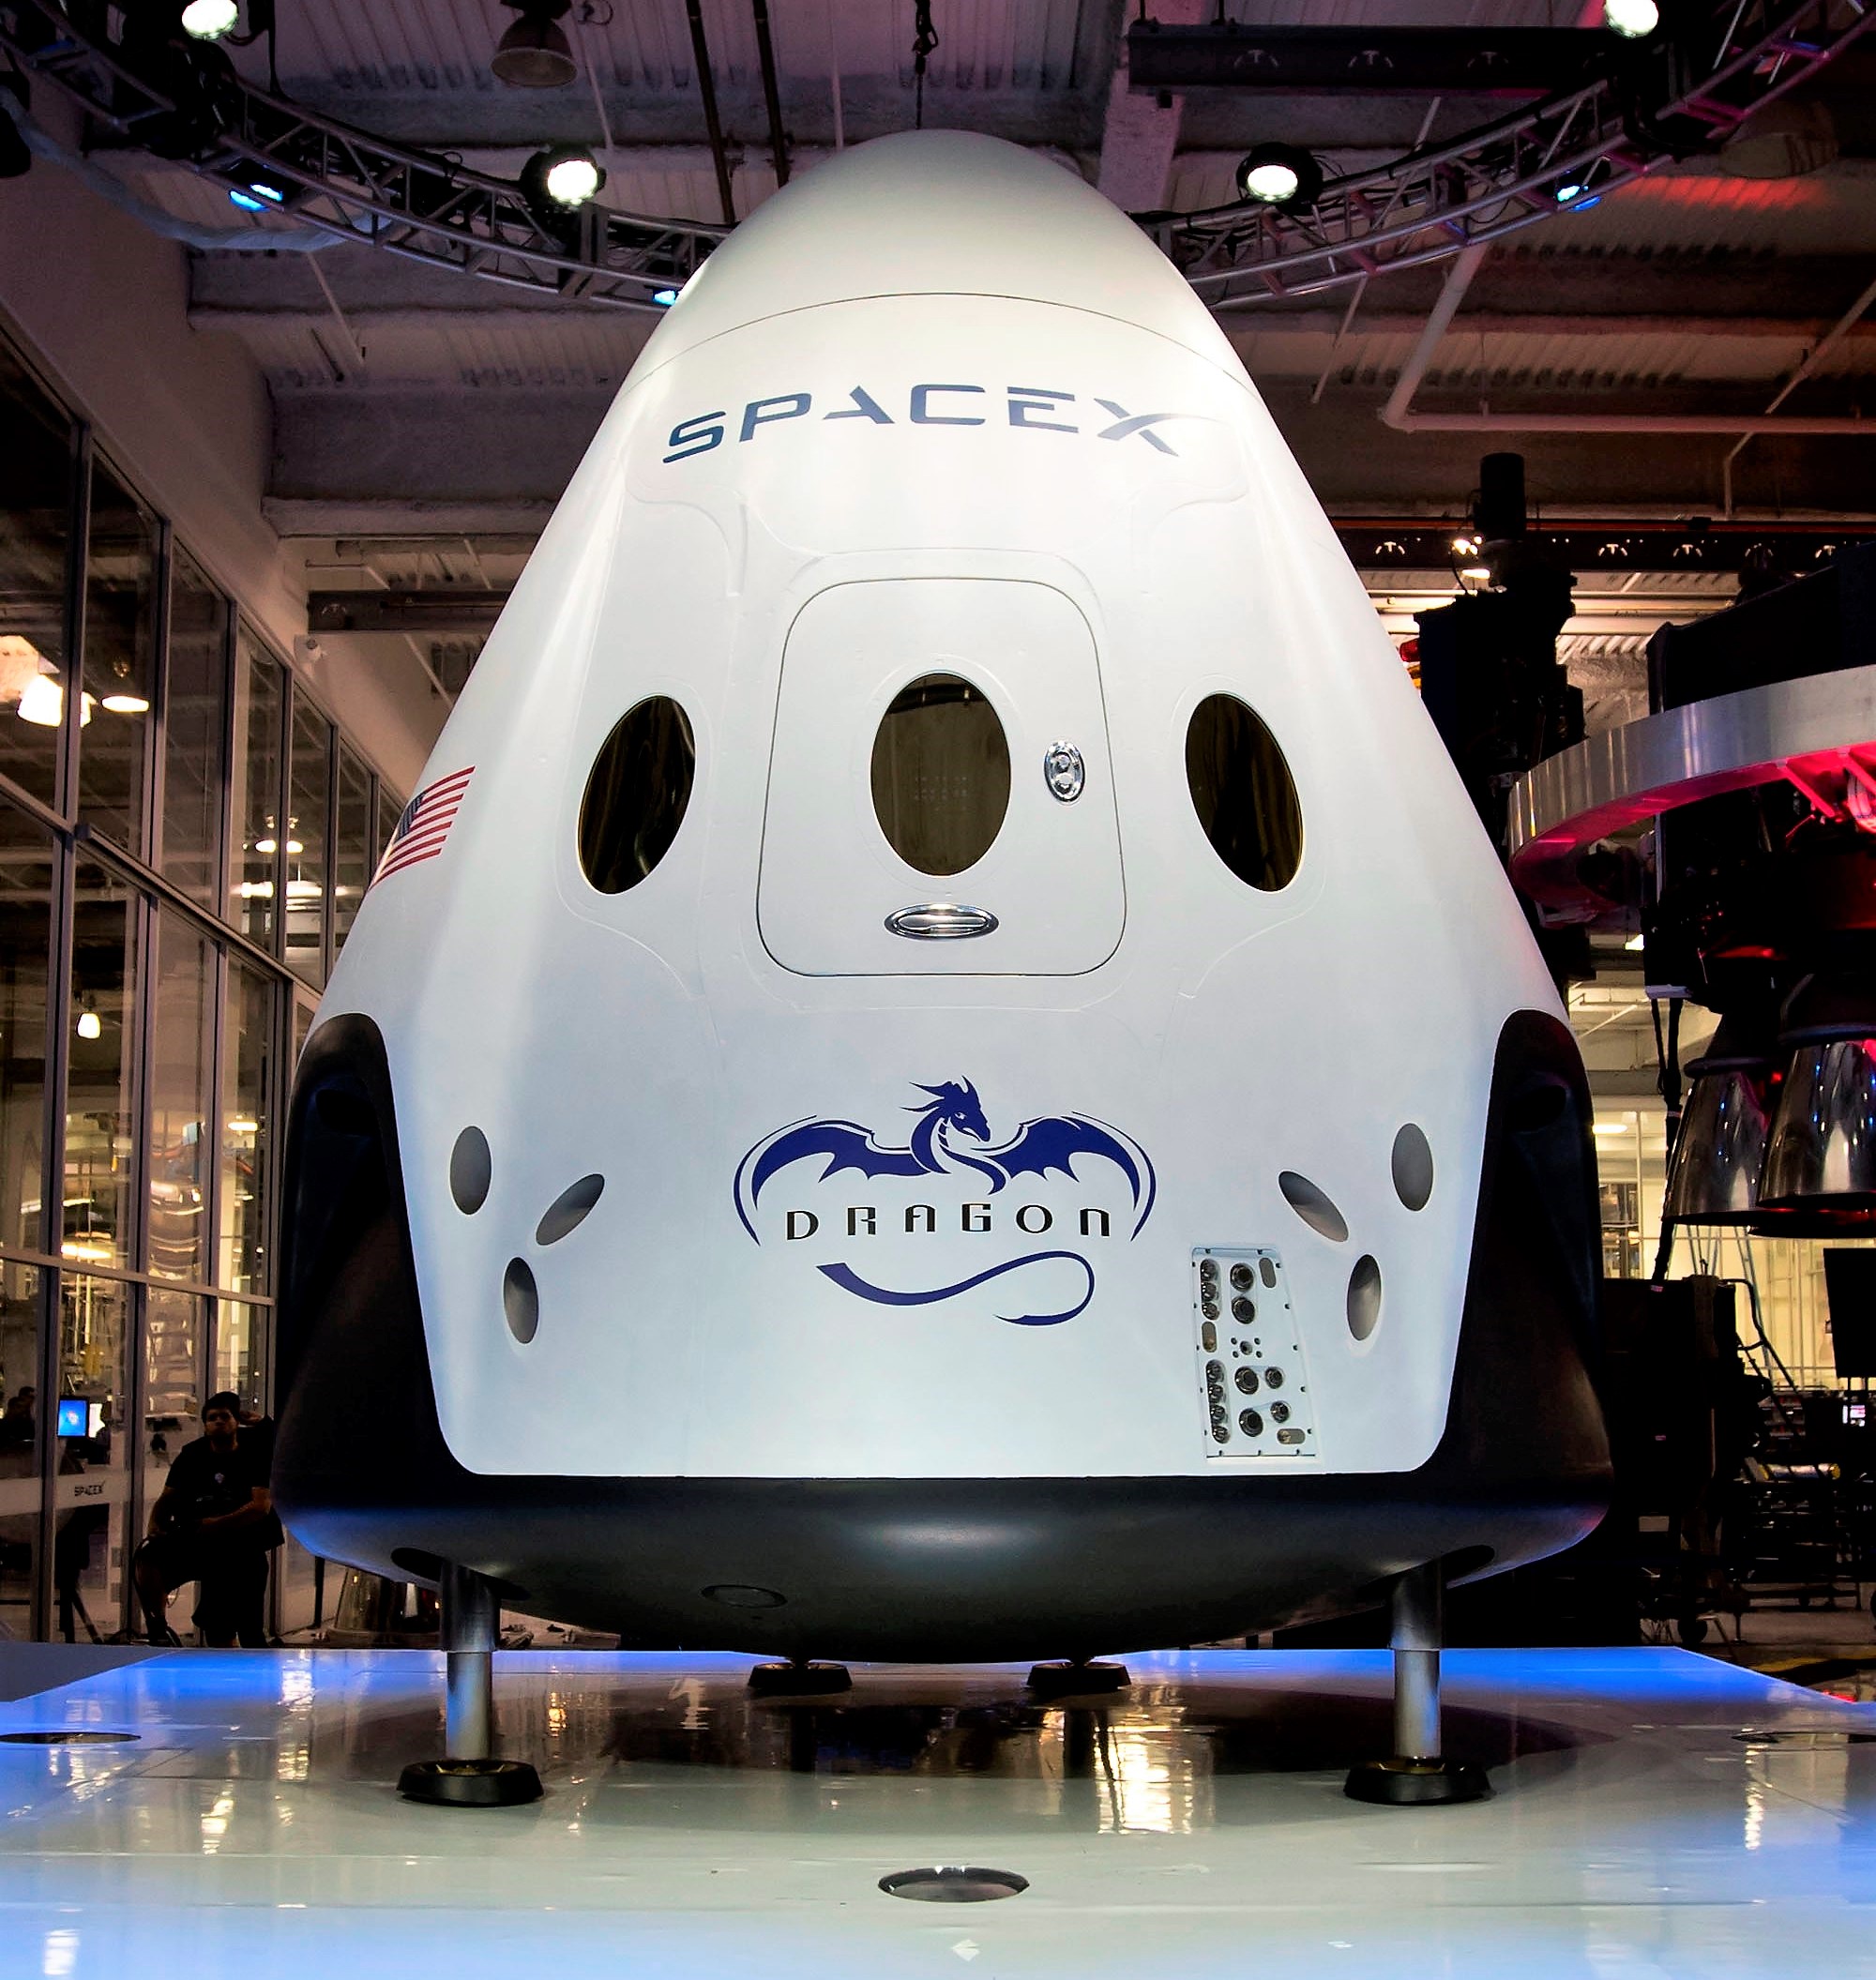 SpaceX will use “Dragon 2” for the moon travel